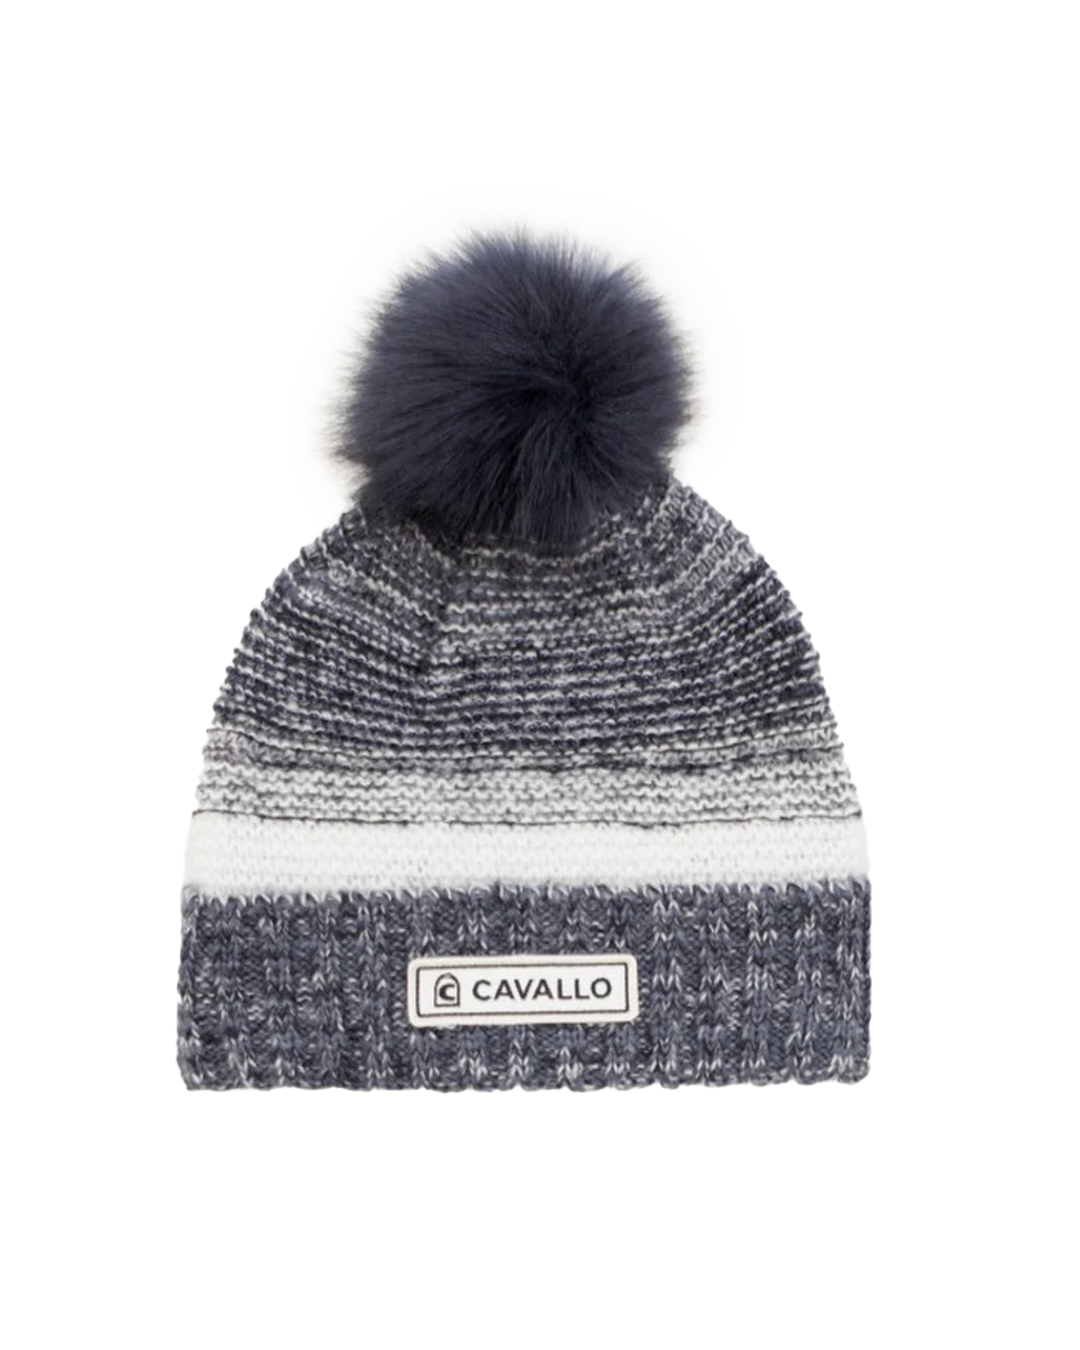 Cavallo Eireen Knit Hat Hats Cavallo - Equestrian Fashion Outfitters